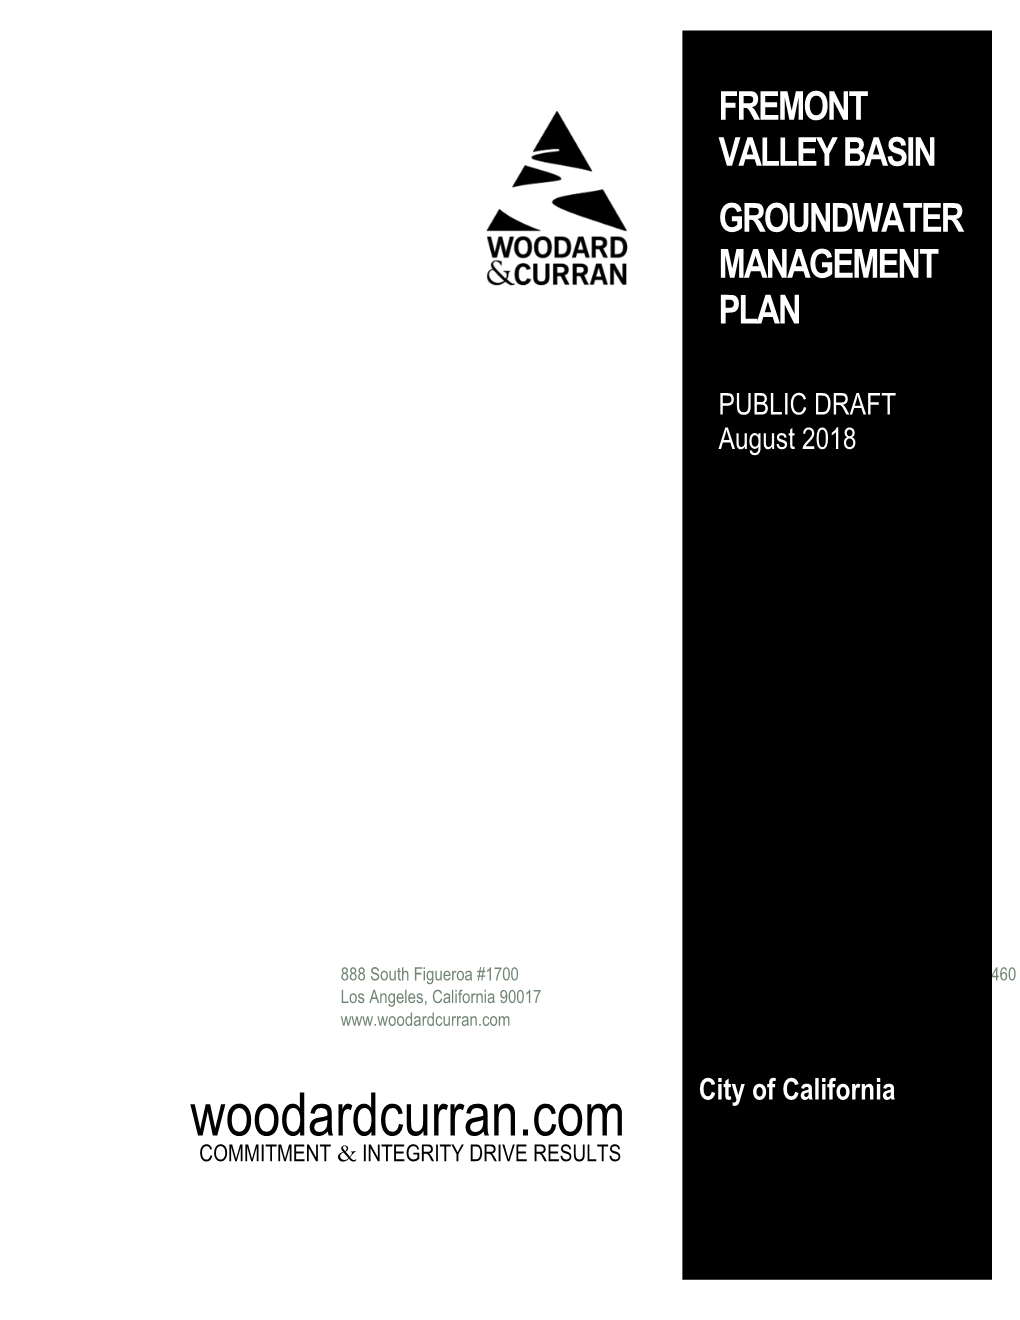 Fremont Valley Basin Groundwater Management Plan